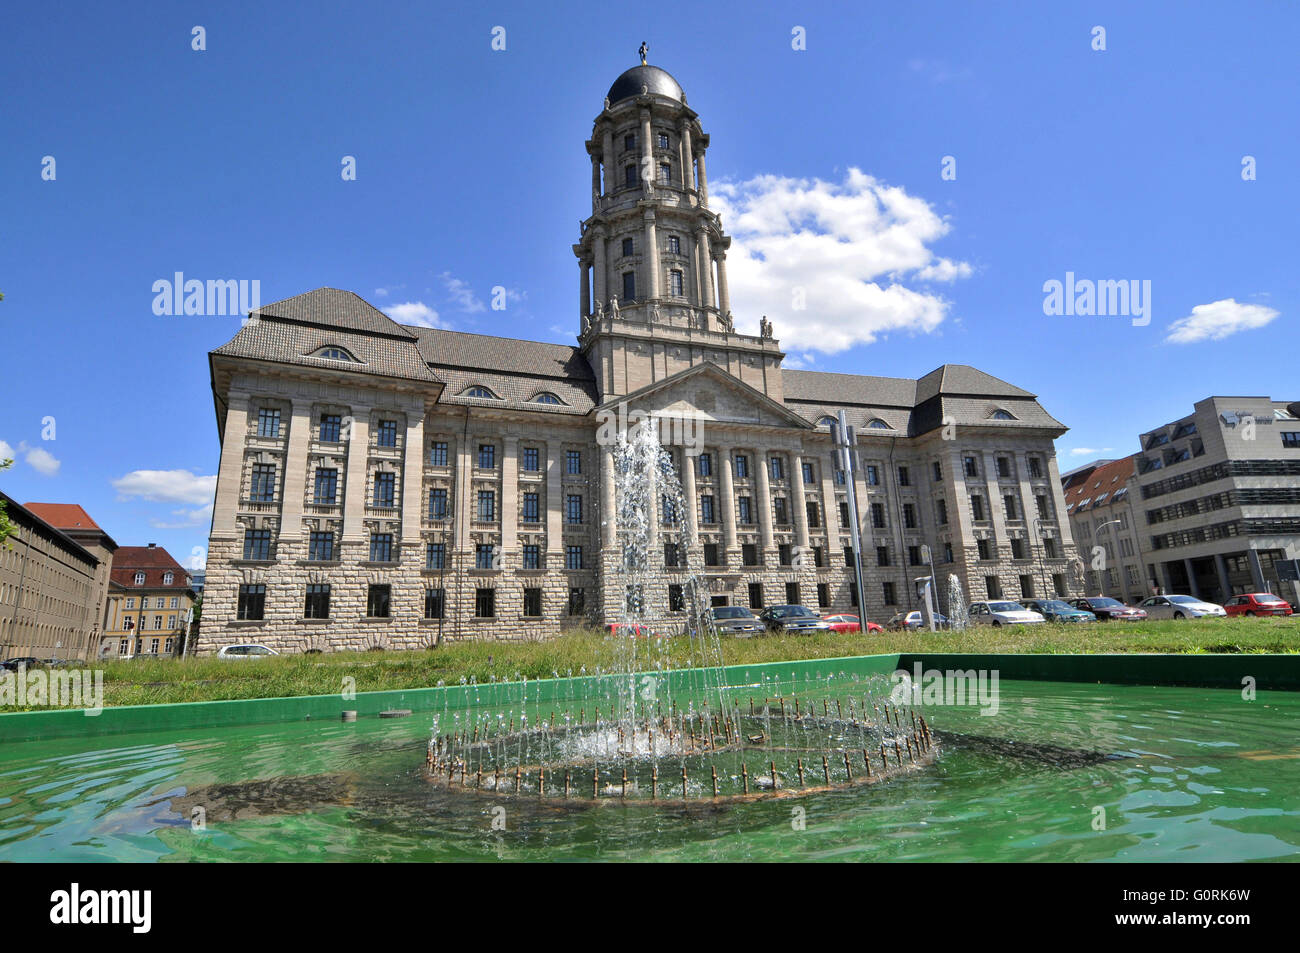 Fountain, Altes Stadthaus, senate department for home affairs, Molkenmarkt, Mitte, Berlin, Germany / Old City House, Old City Administration Building Stock Photo